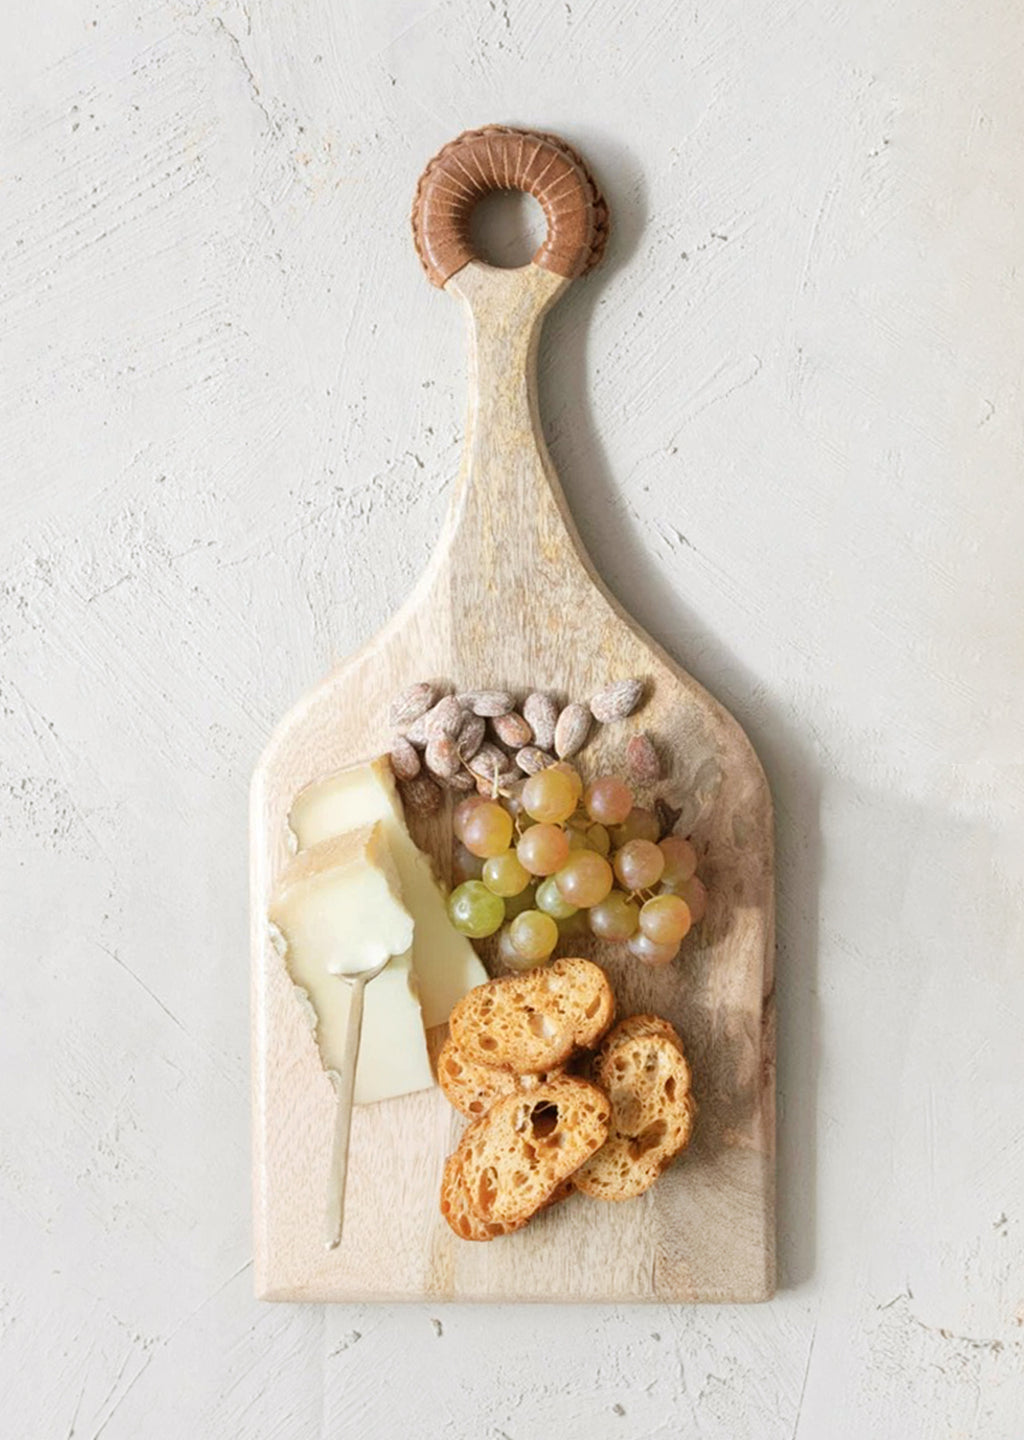 2: A wooden cutting board holding cheese, fruit and nuts.